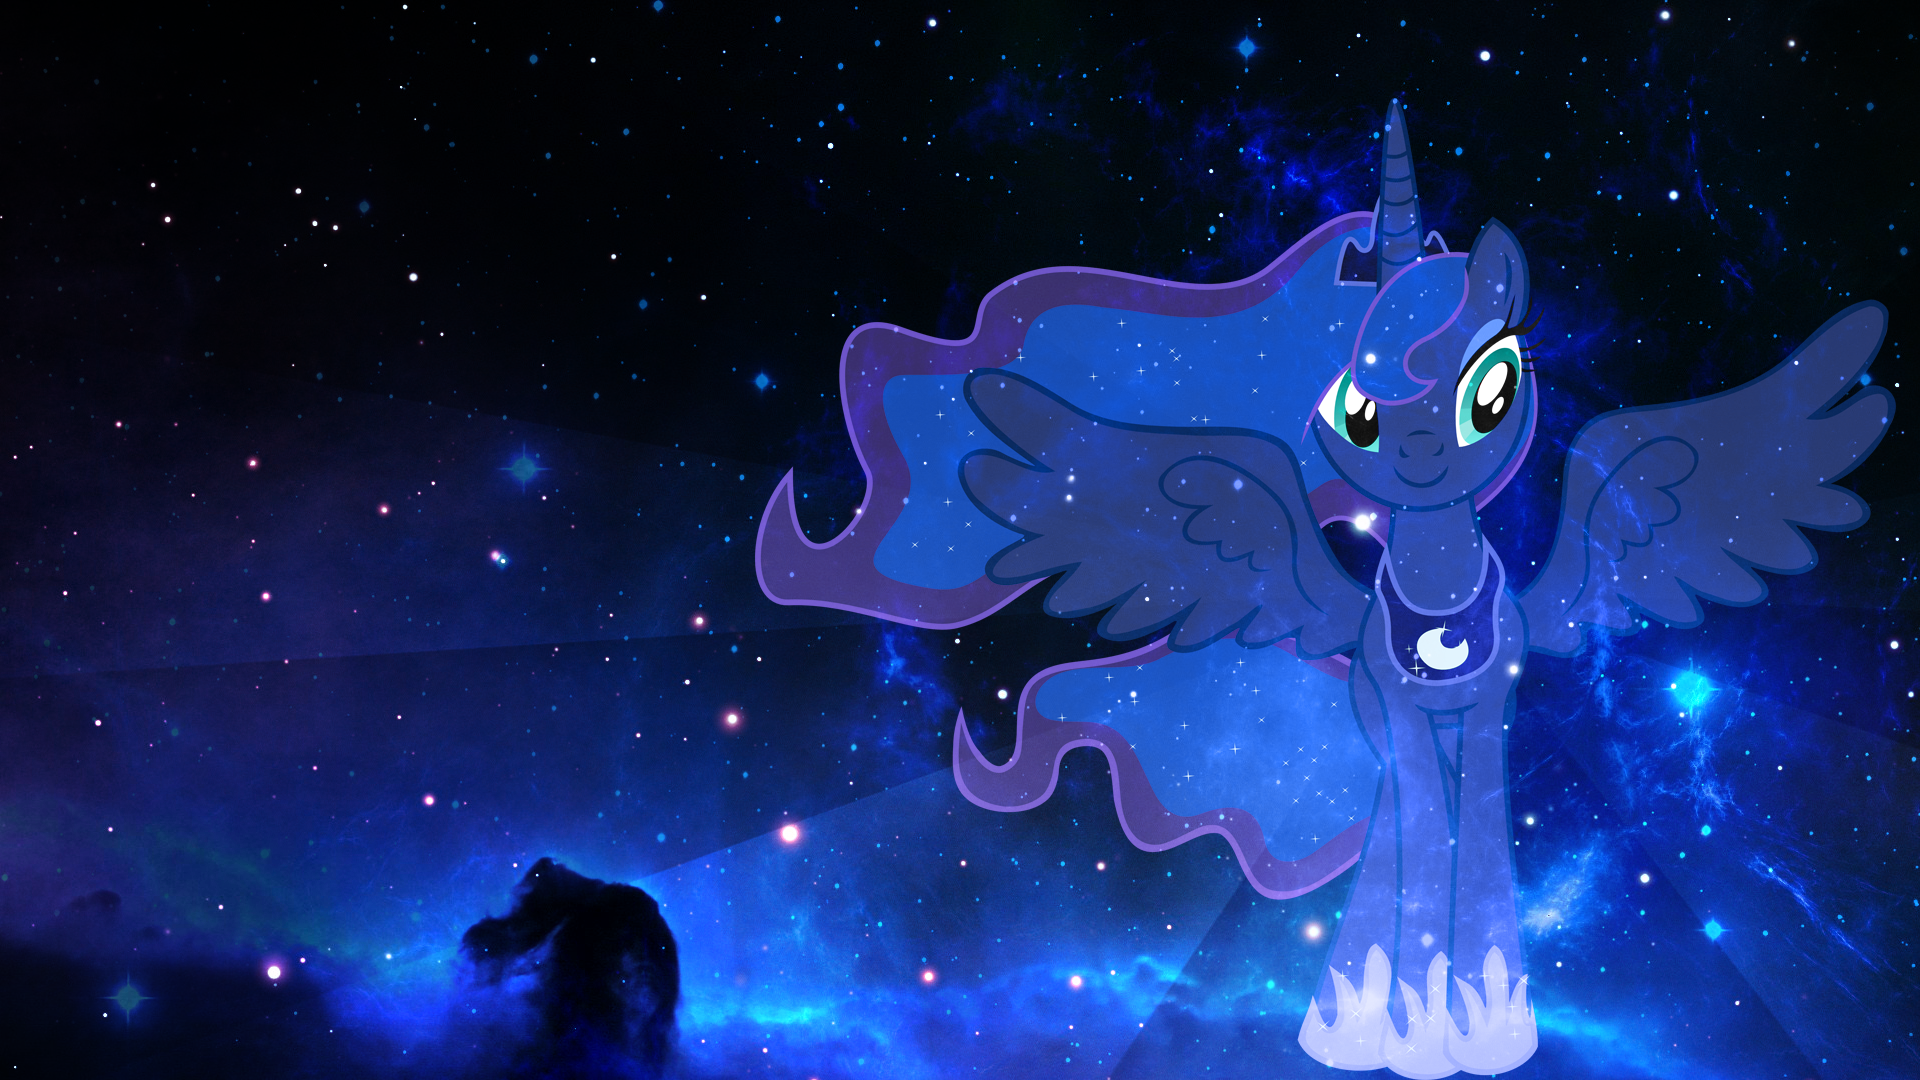 Luna Wallpaper by Couth-Kancerous and TheOneWithTheOctaves